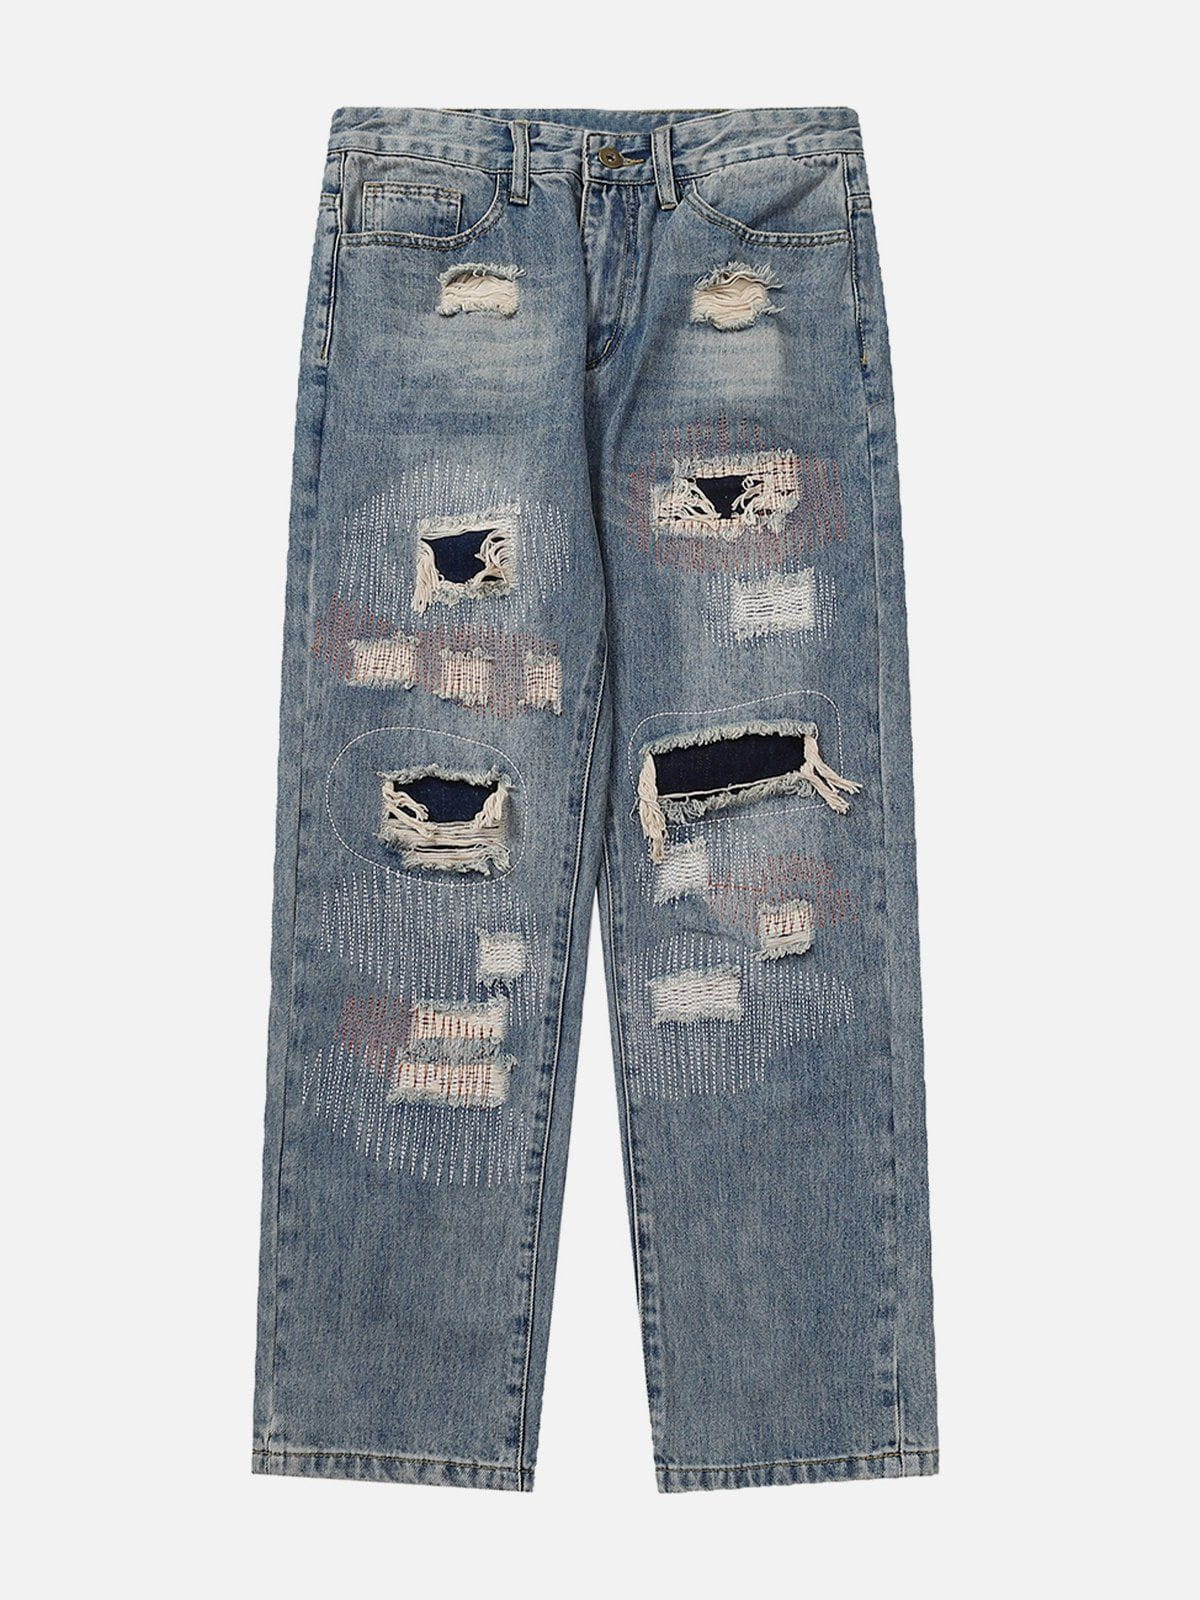 Aelfric Eden Washed Hole Jeans